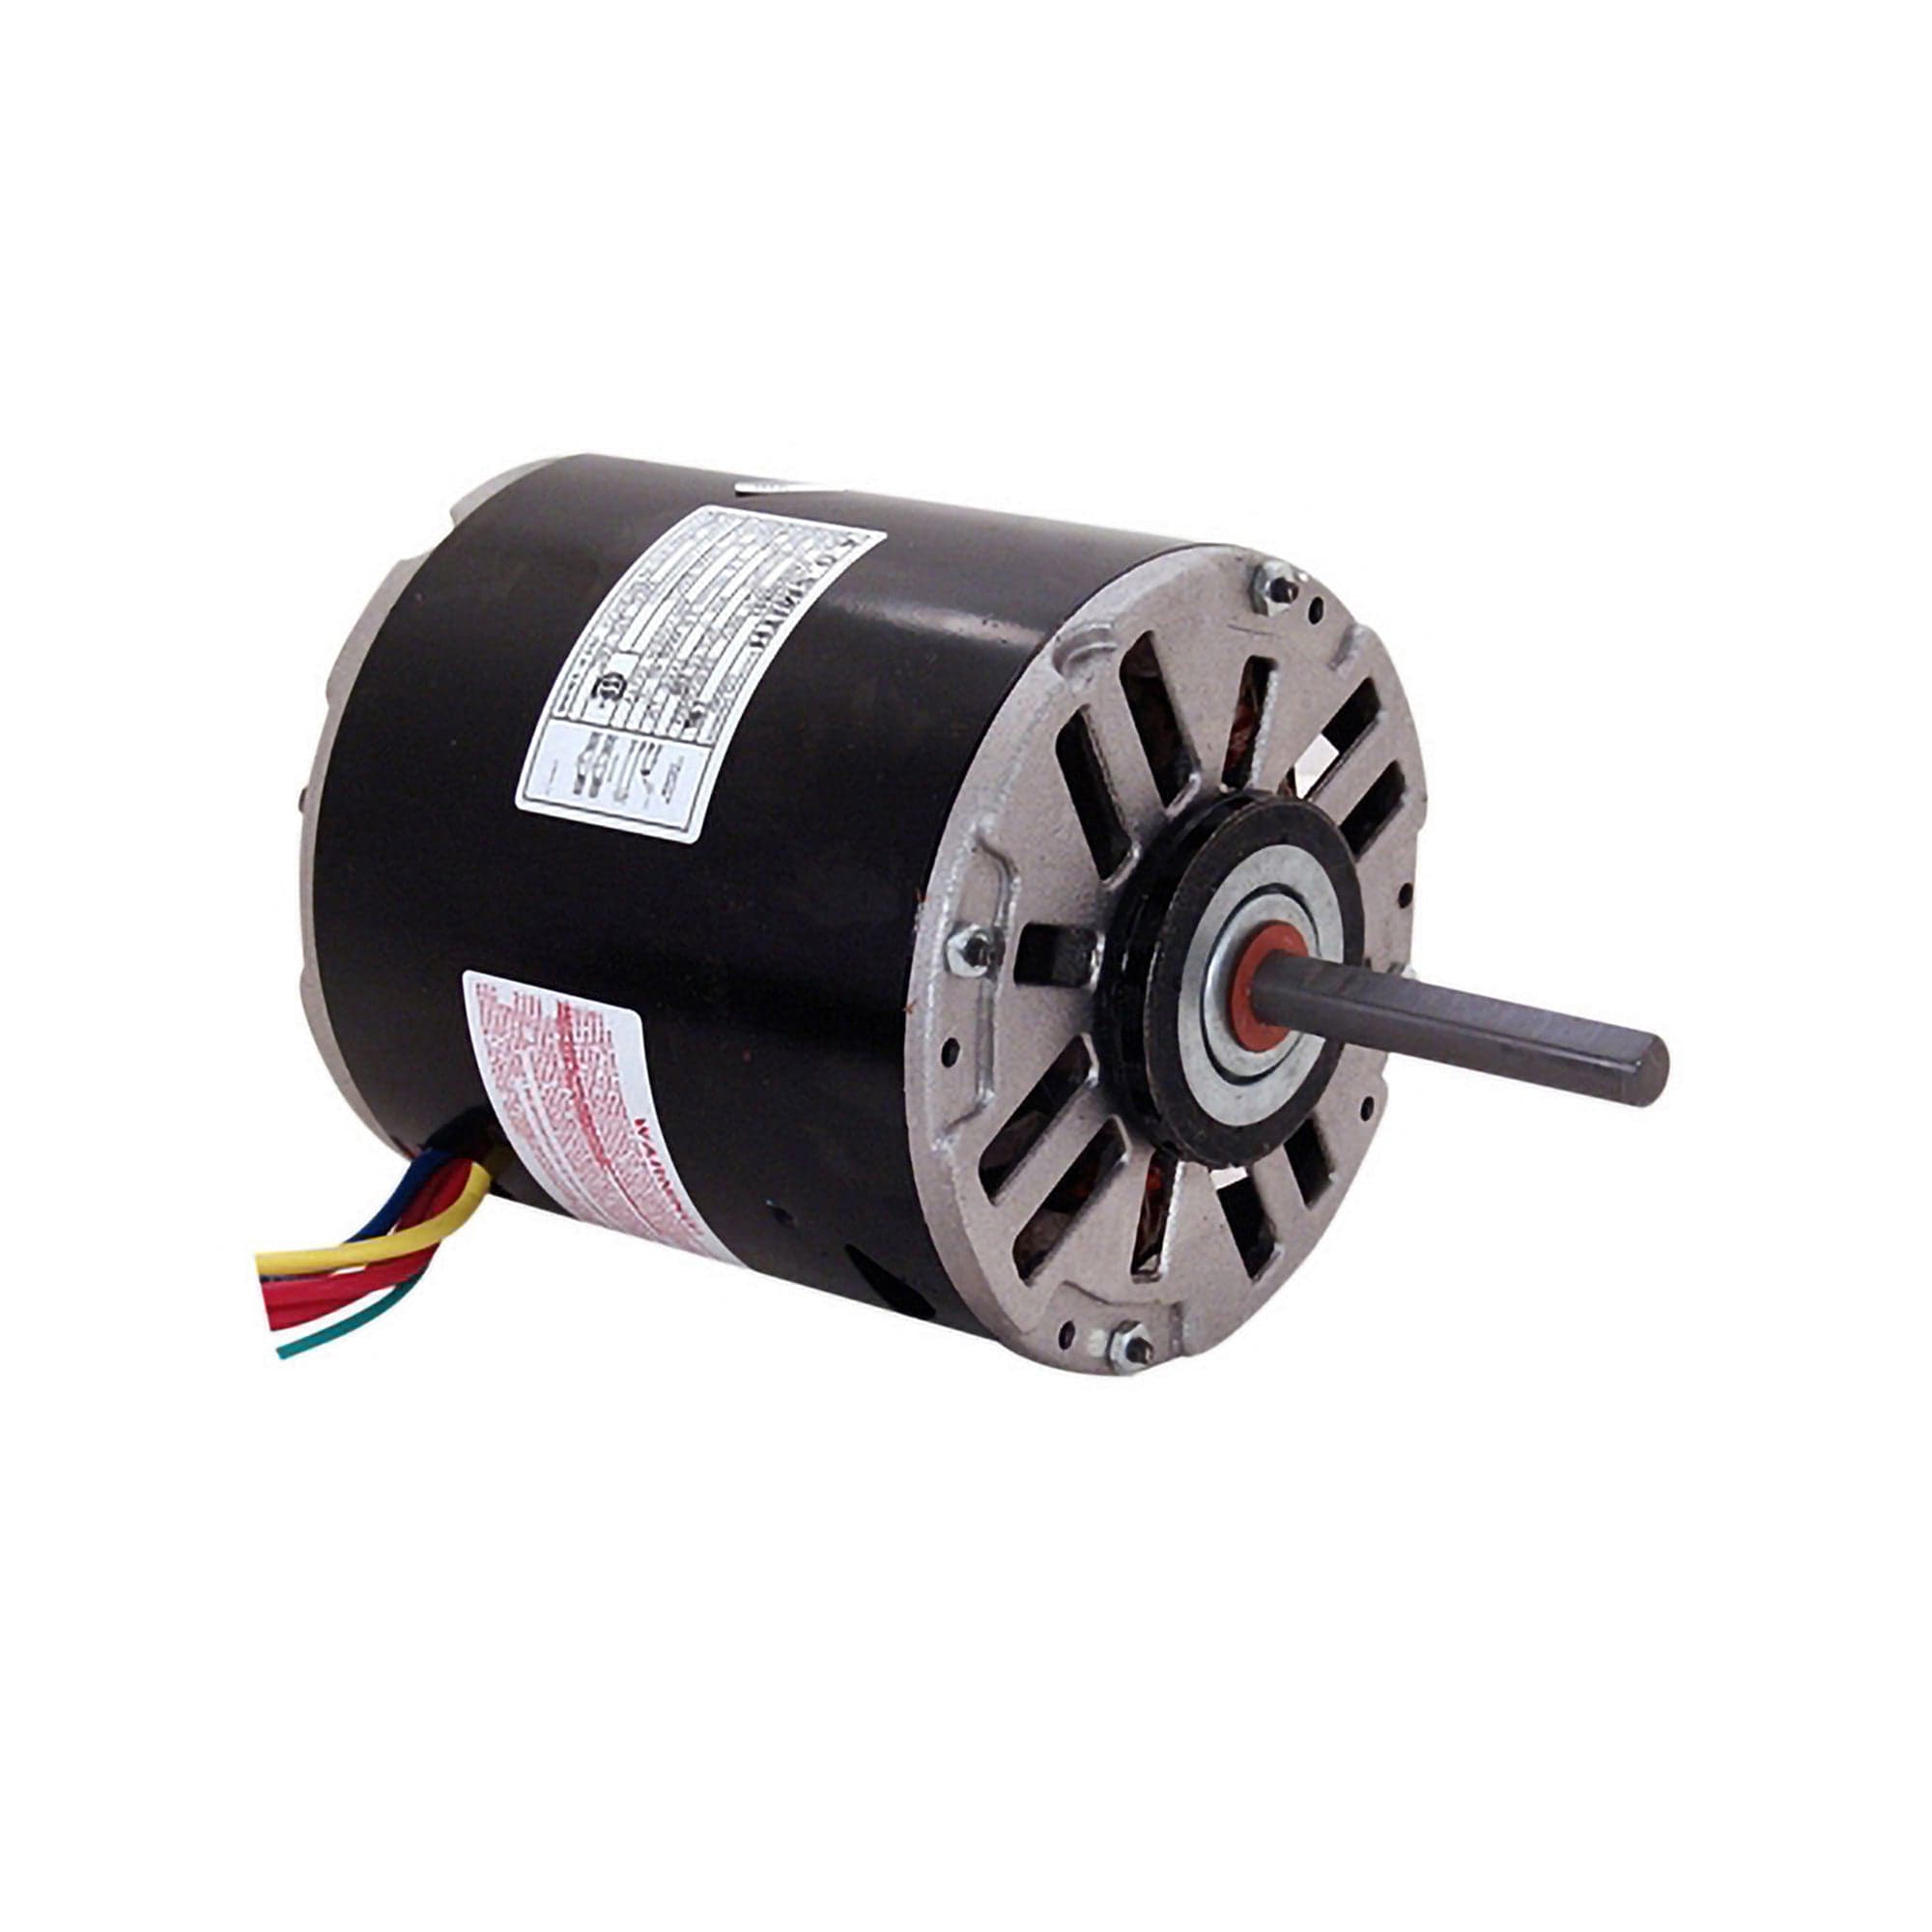 Century 9405A 5-5/8" Dia. Direct Drive Blower Motor, 115V, 1075 RPM Replaces Lennox